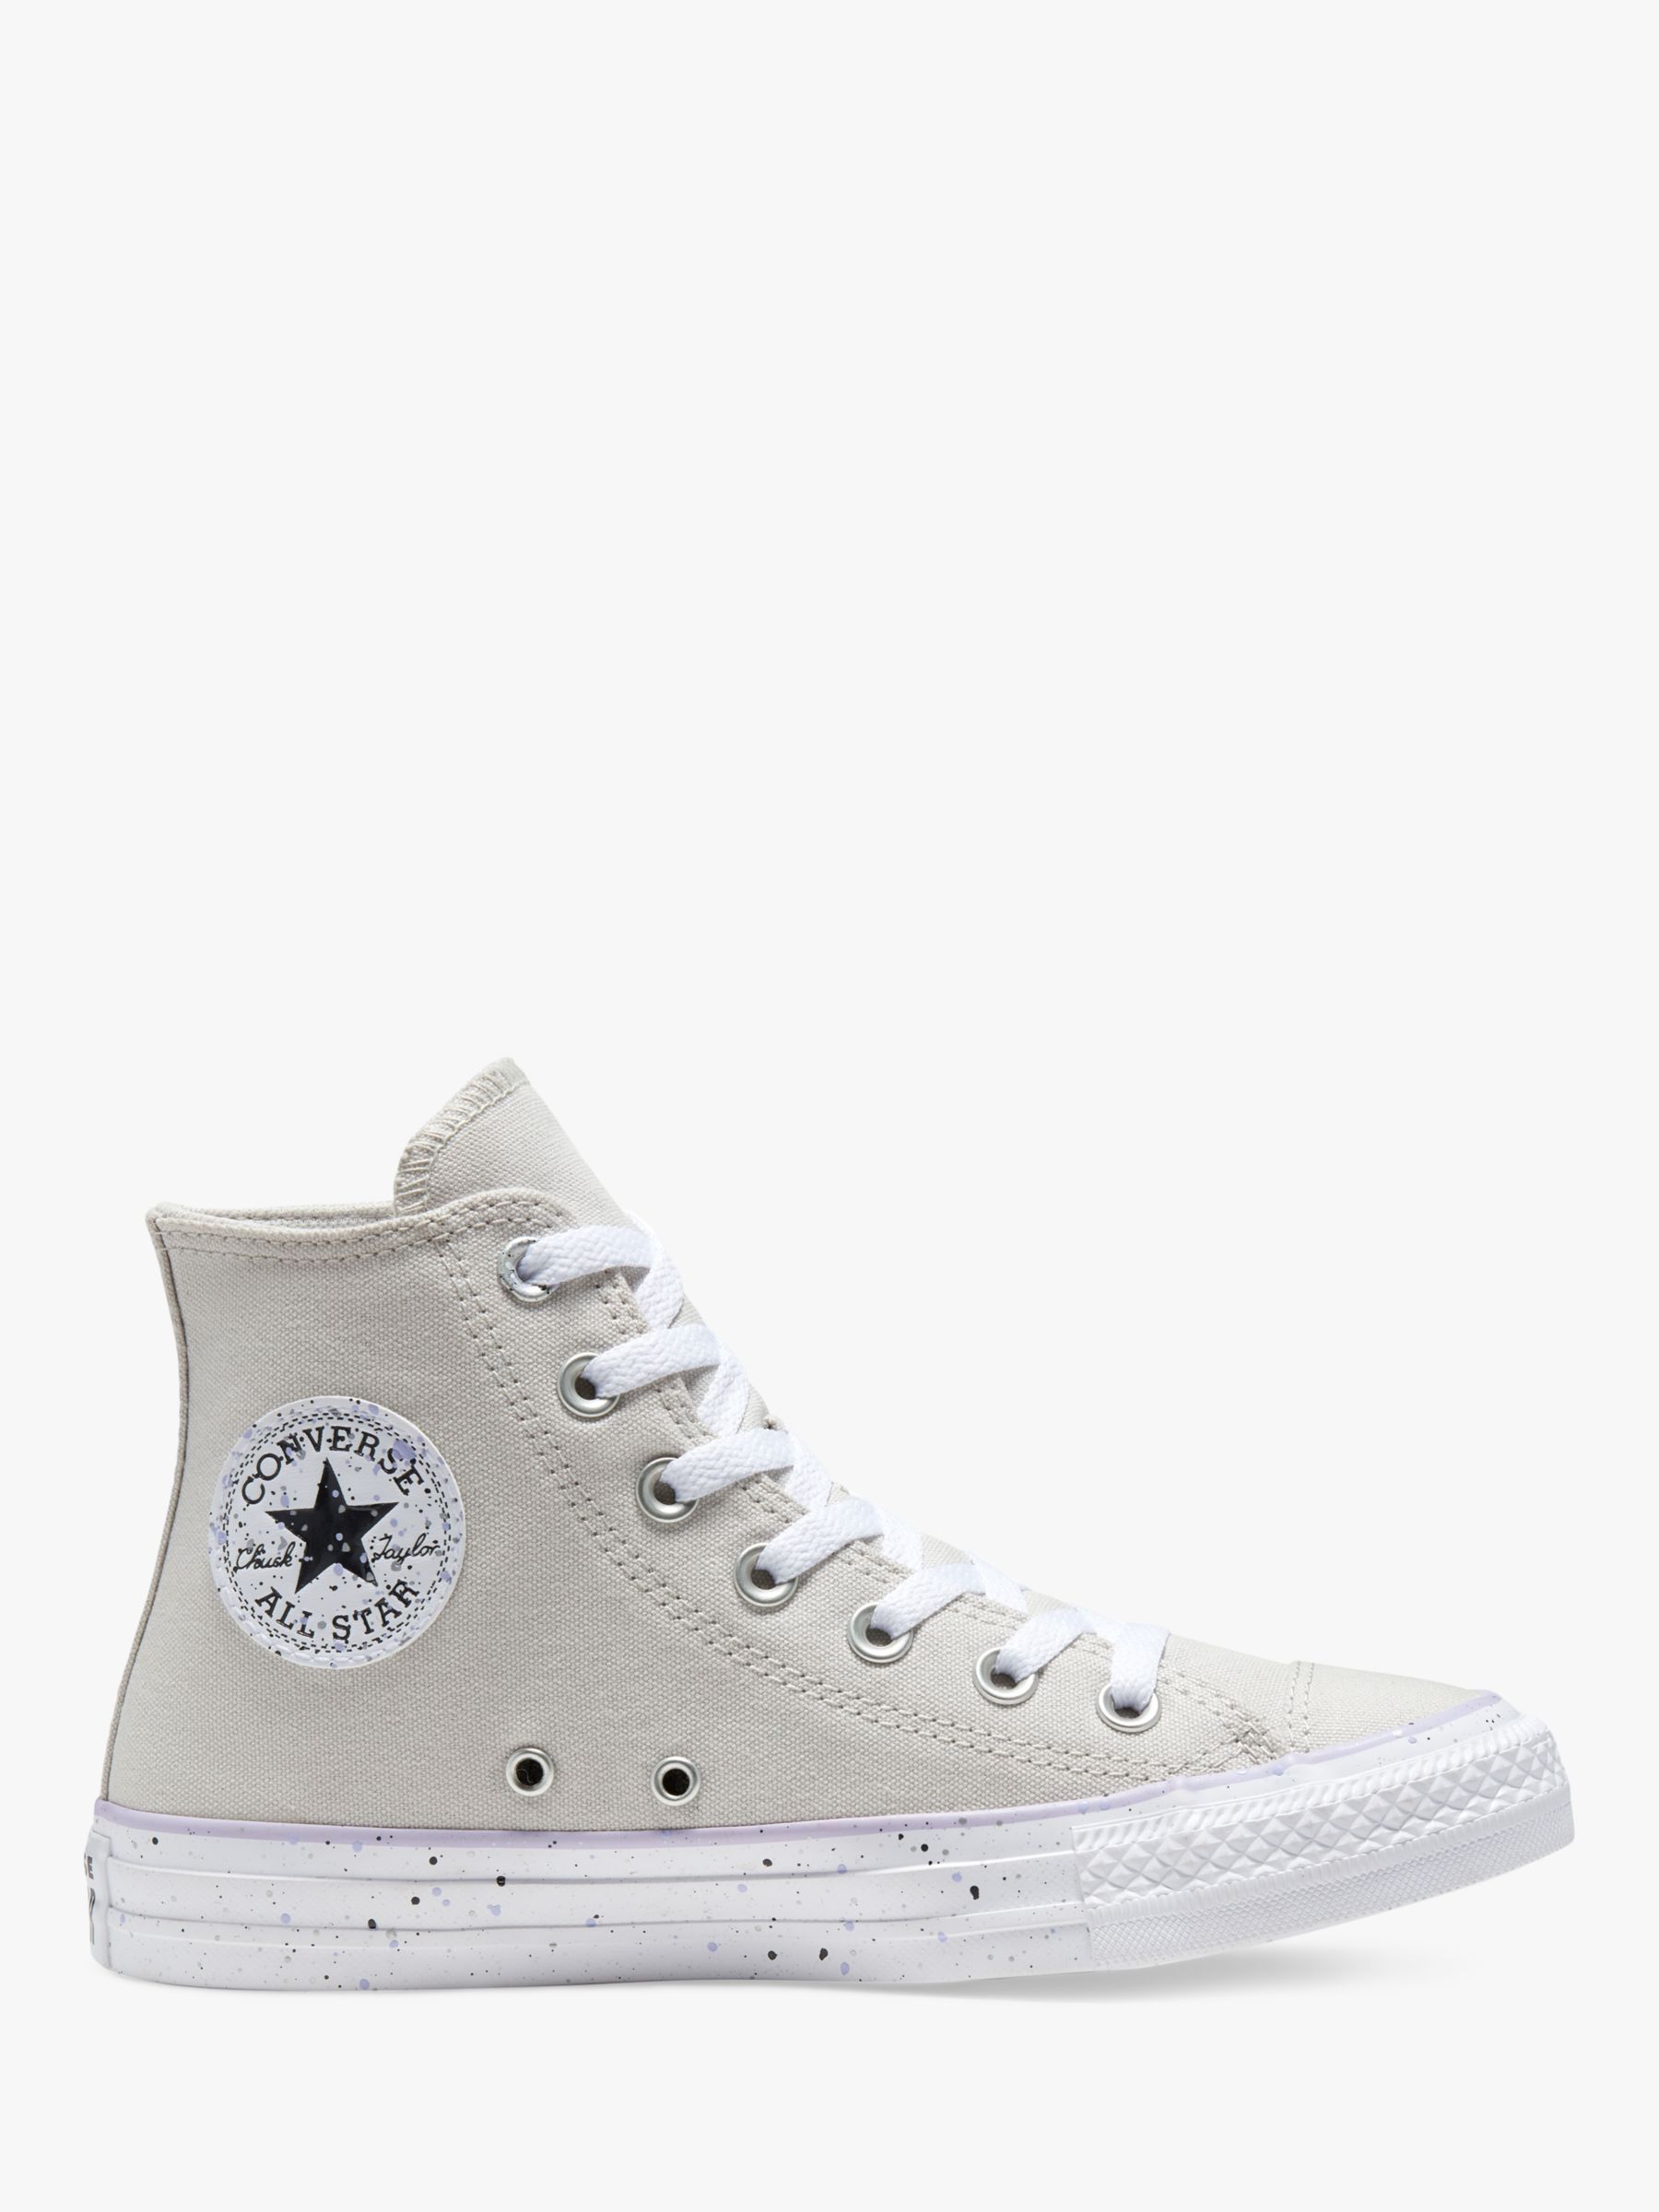 next converse trainers